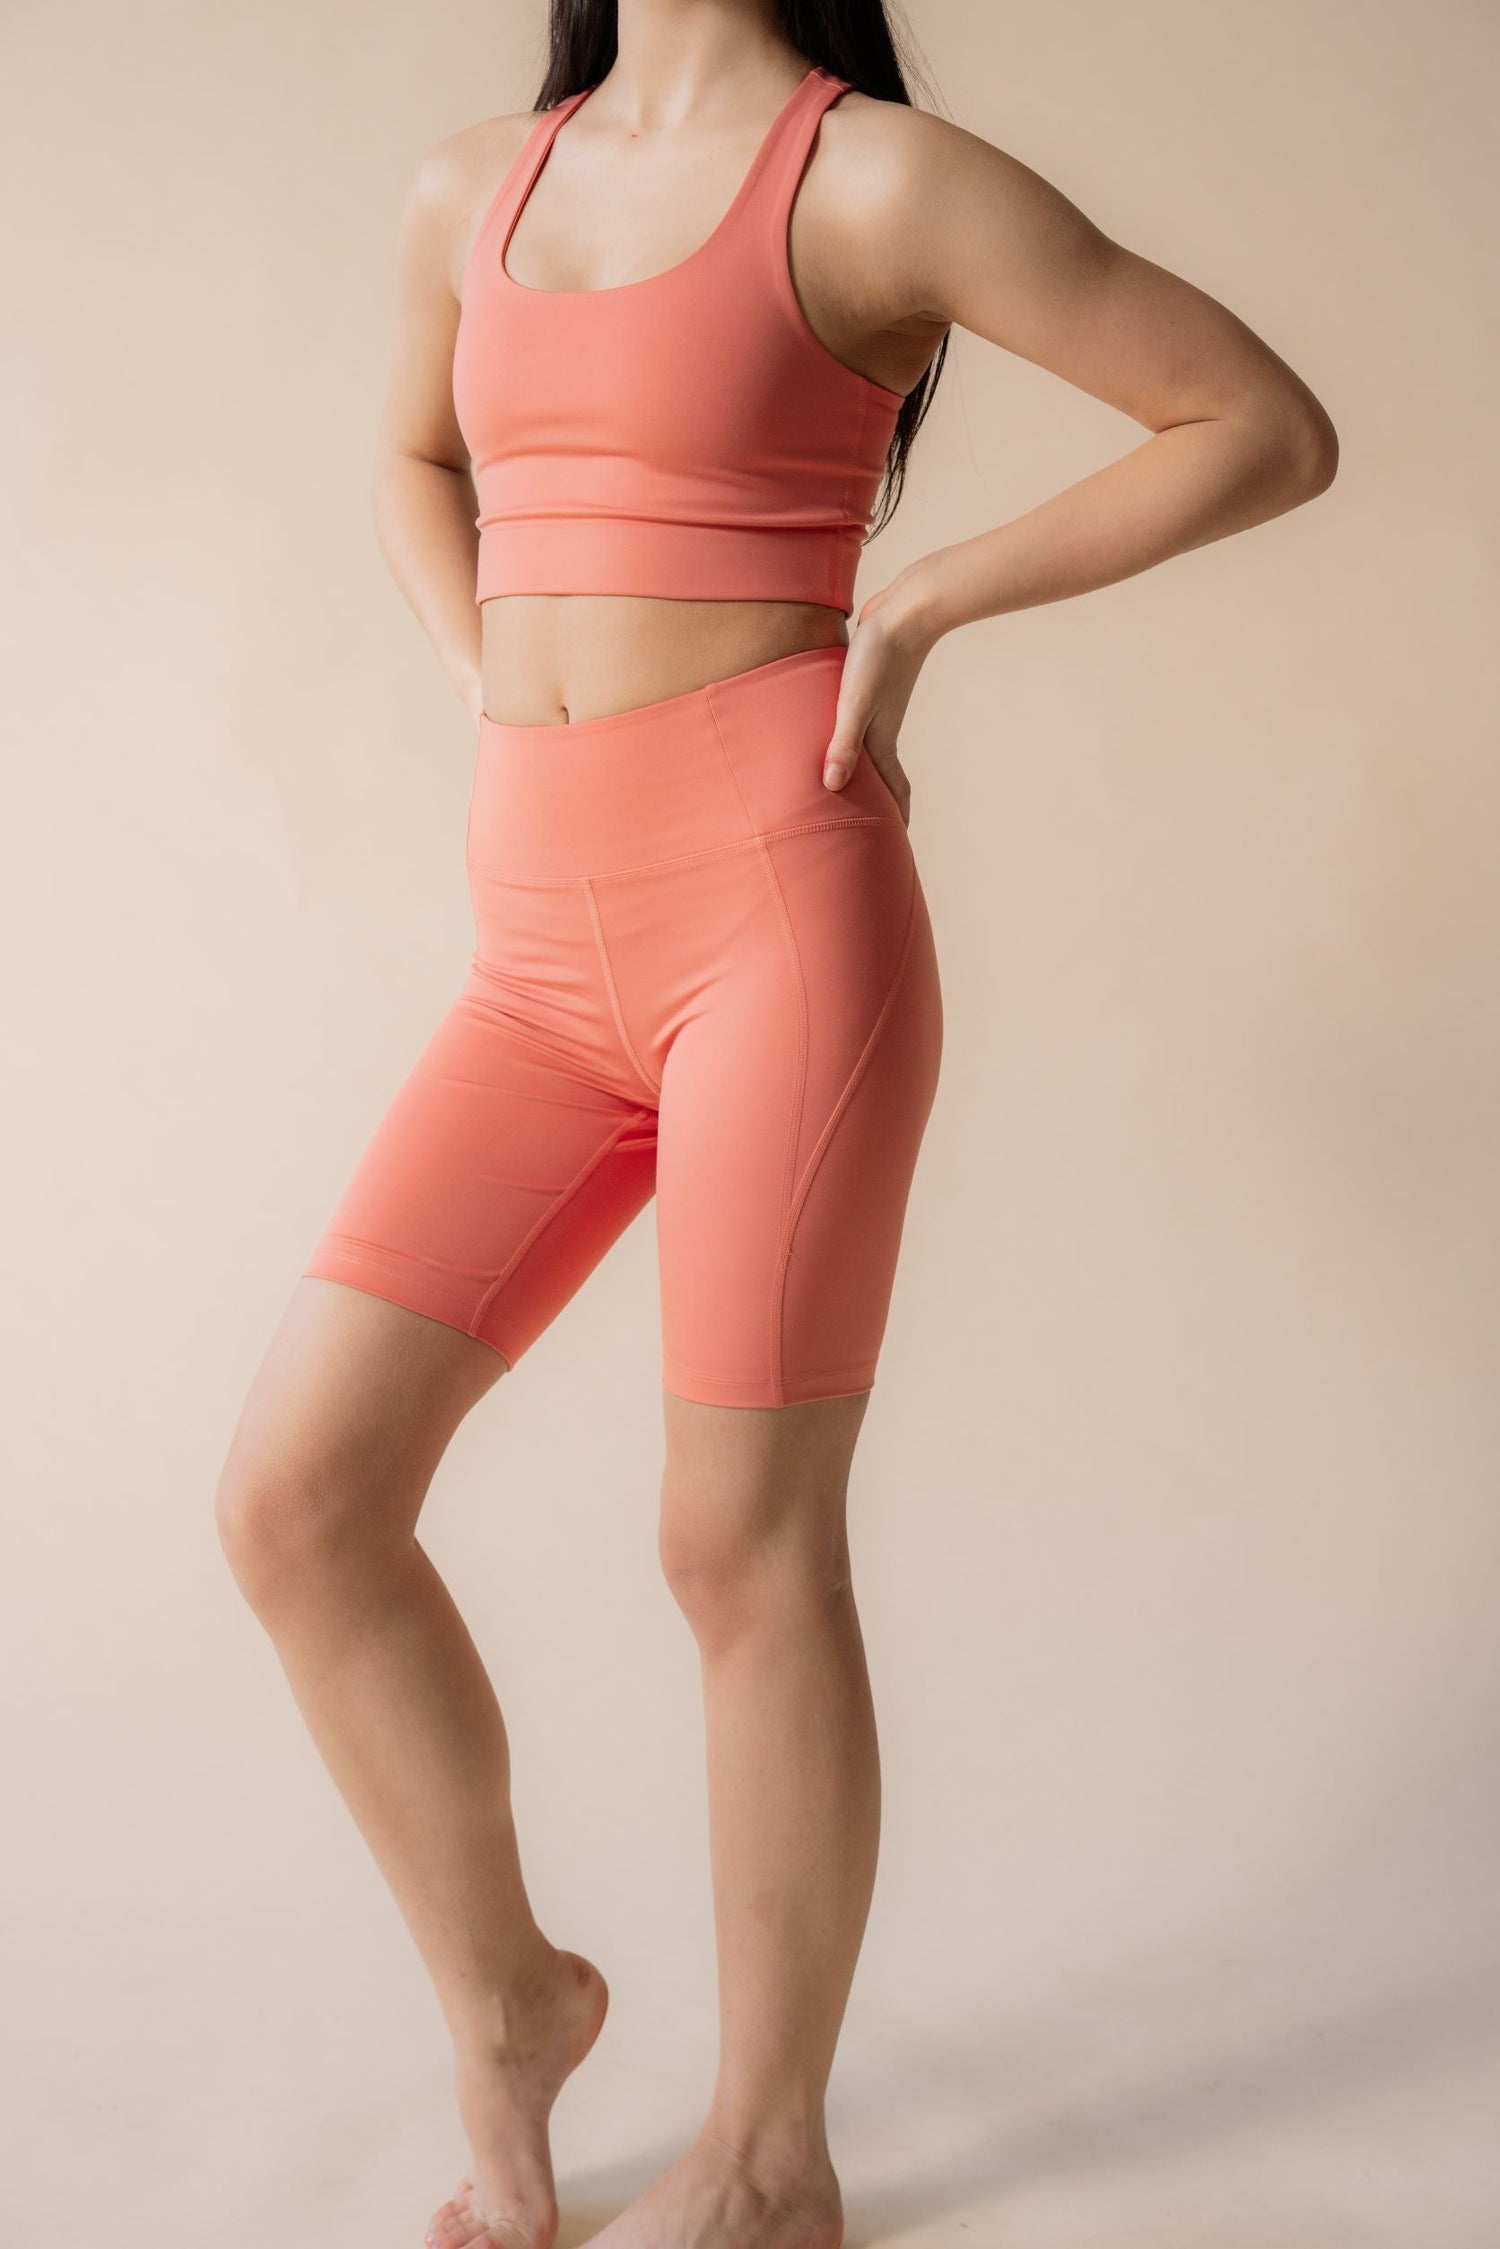 Girlfriend Collective Bike Shorts - Made from recycled plastic bottles Primrose Pants